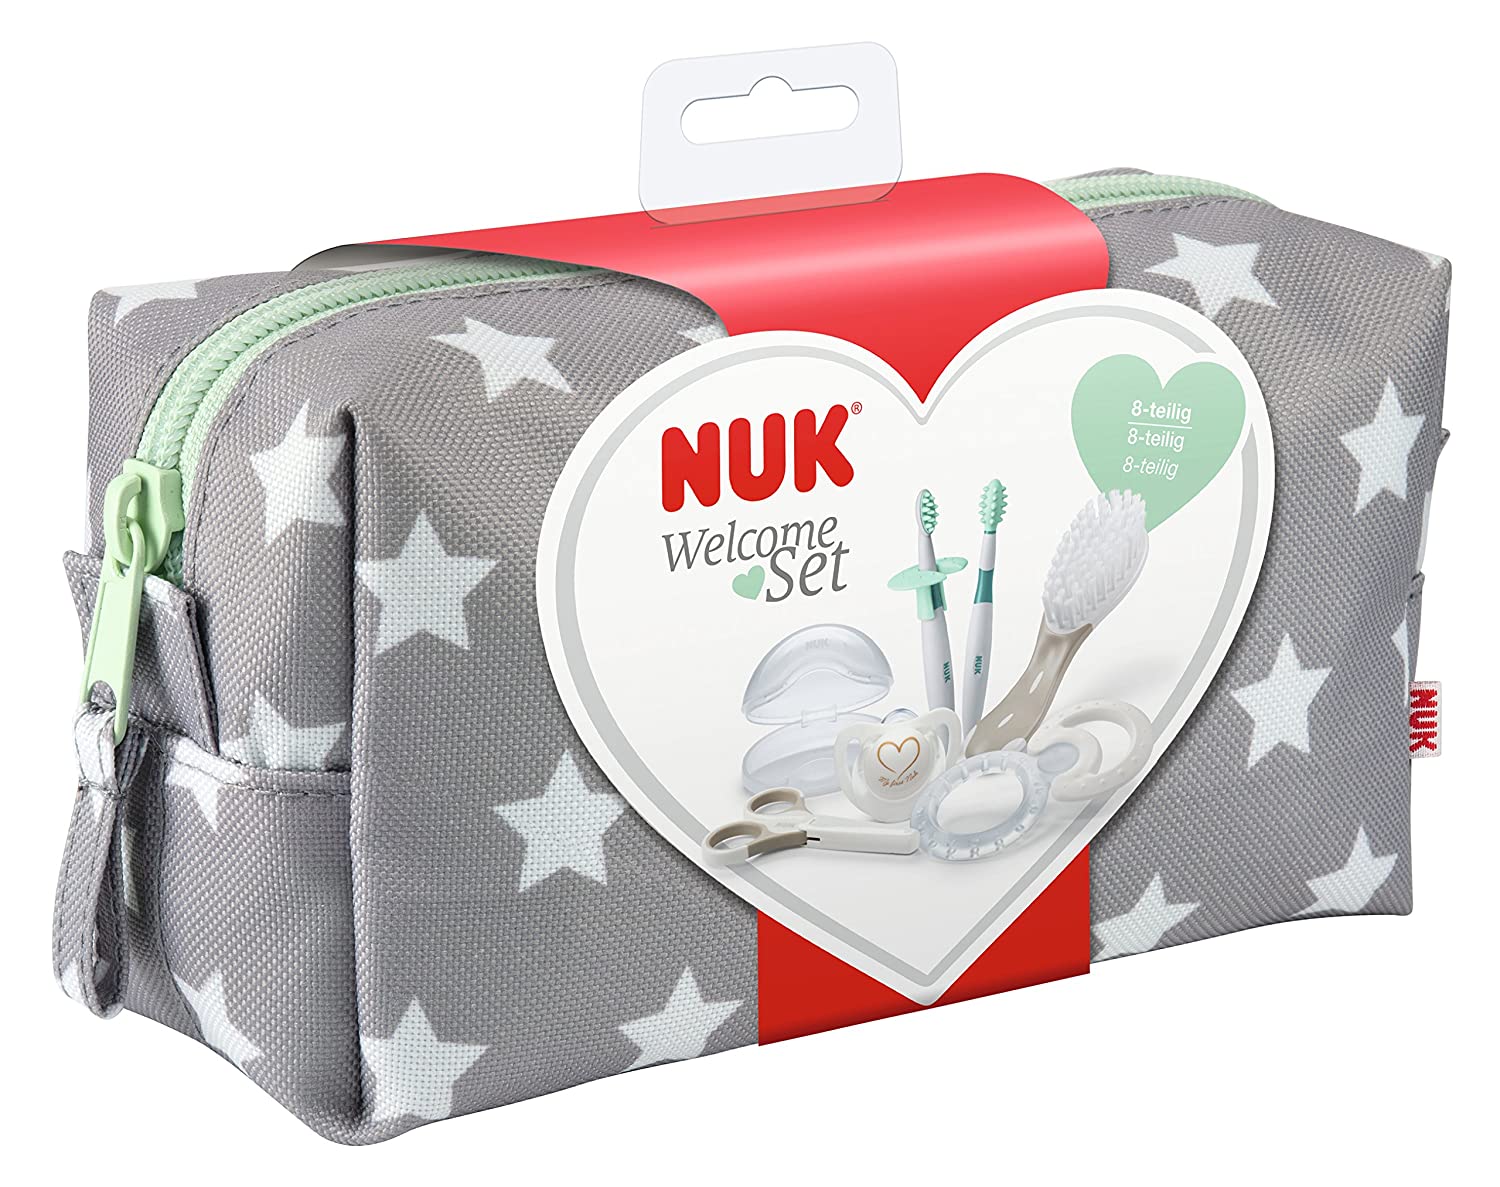 NUK Baby Care Welcome Set, Perfect starter set for Newborns, 7 NUK Products in a Beautiful Bag